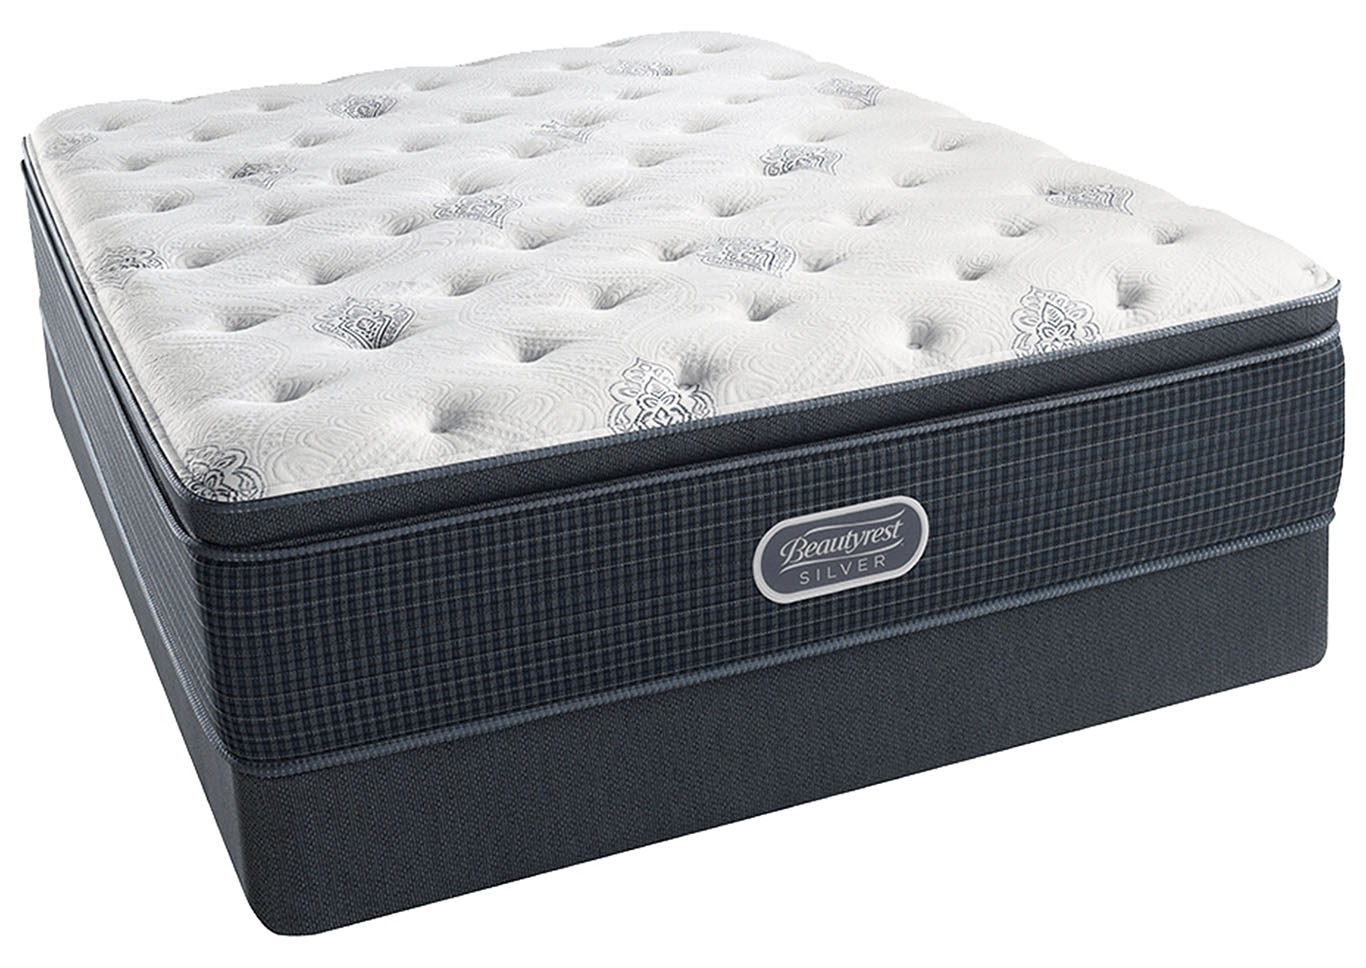 Summer Sizzle Luxury Firm Pillow Top Twin Mattress,Instore